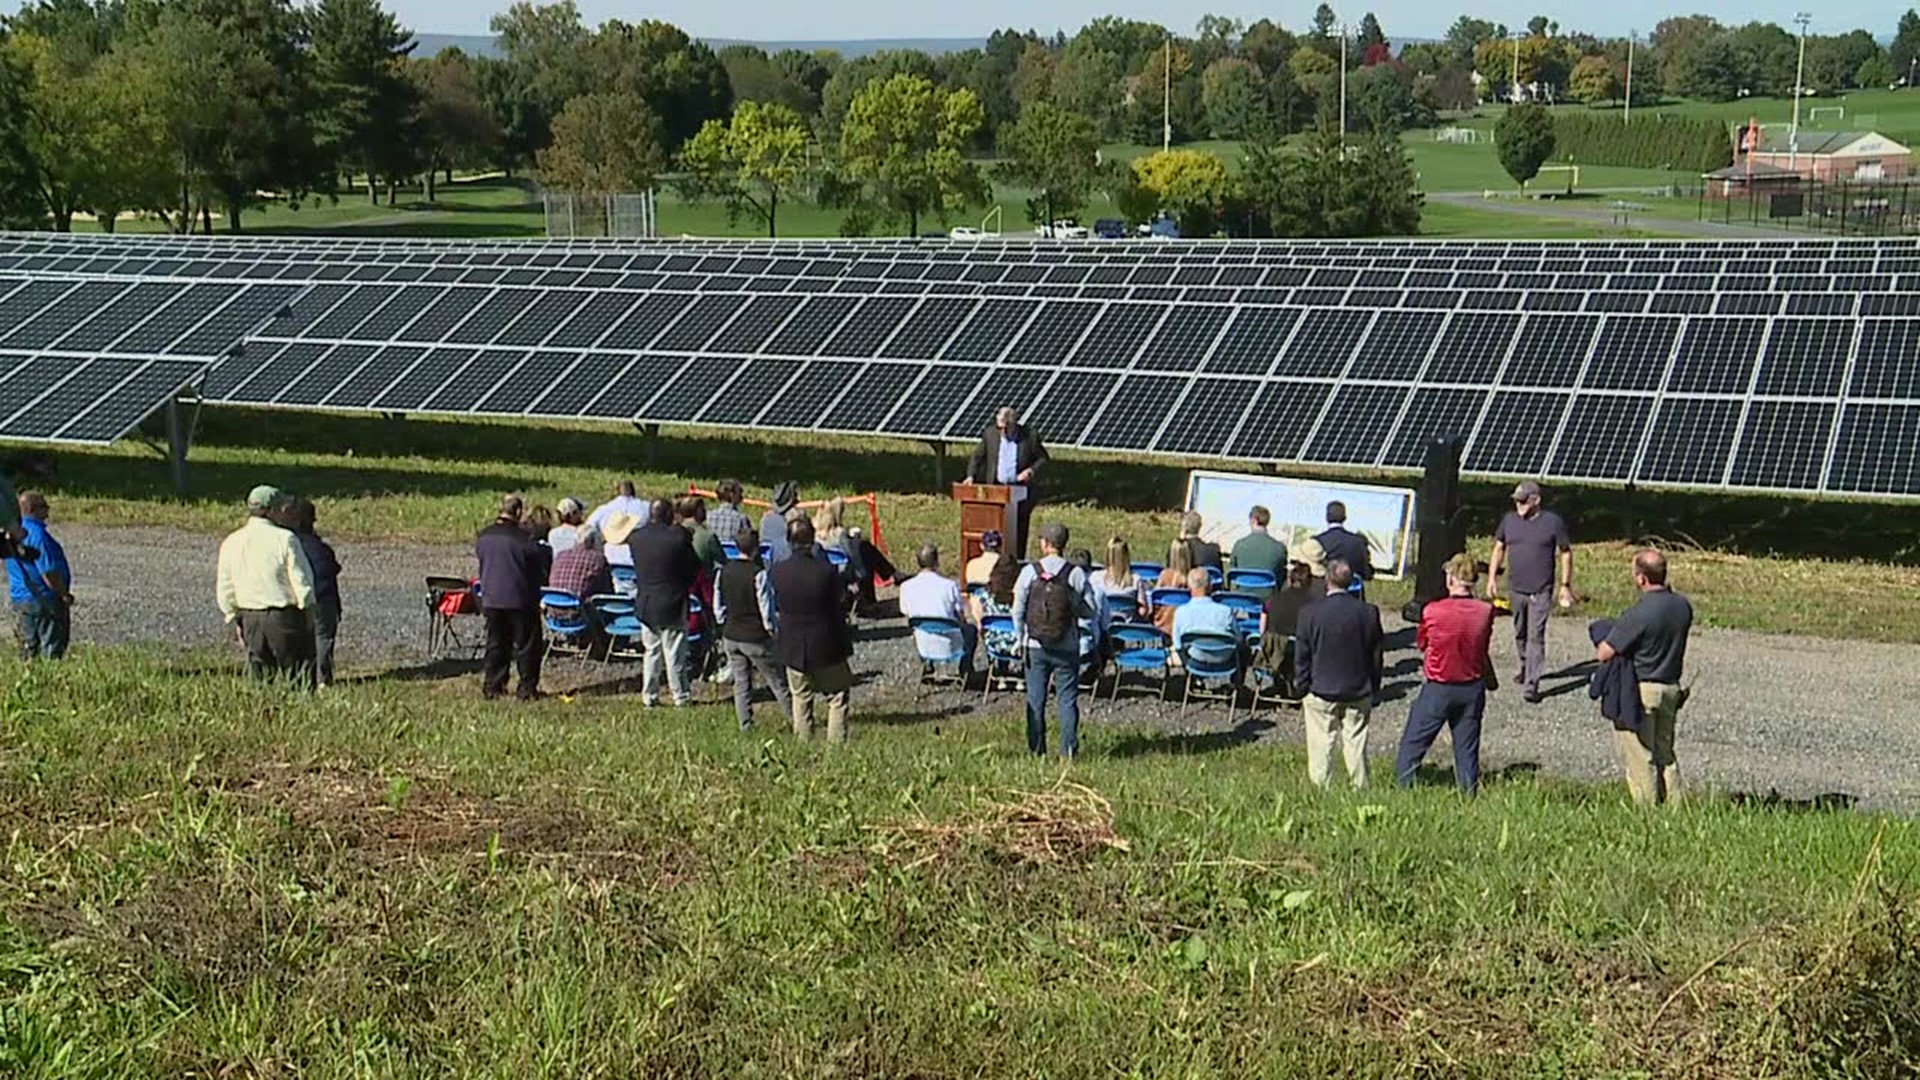 The solar panels will be responsible for almost 10 percent of Bucknell's electricity usage.